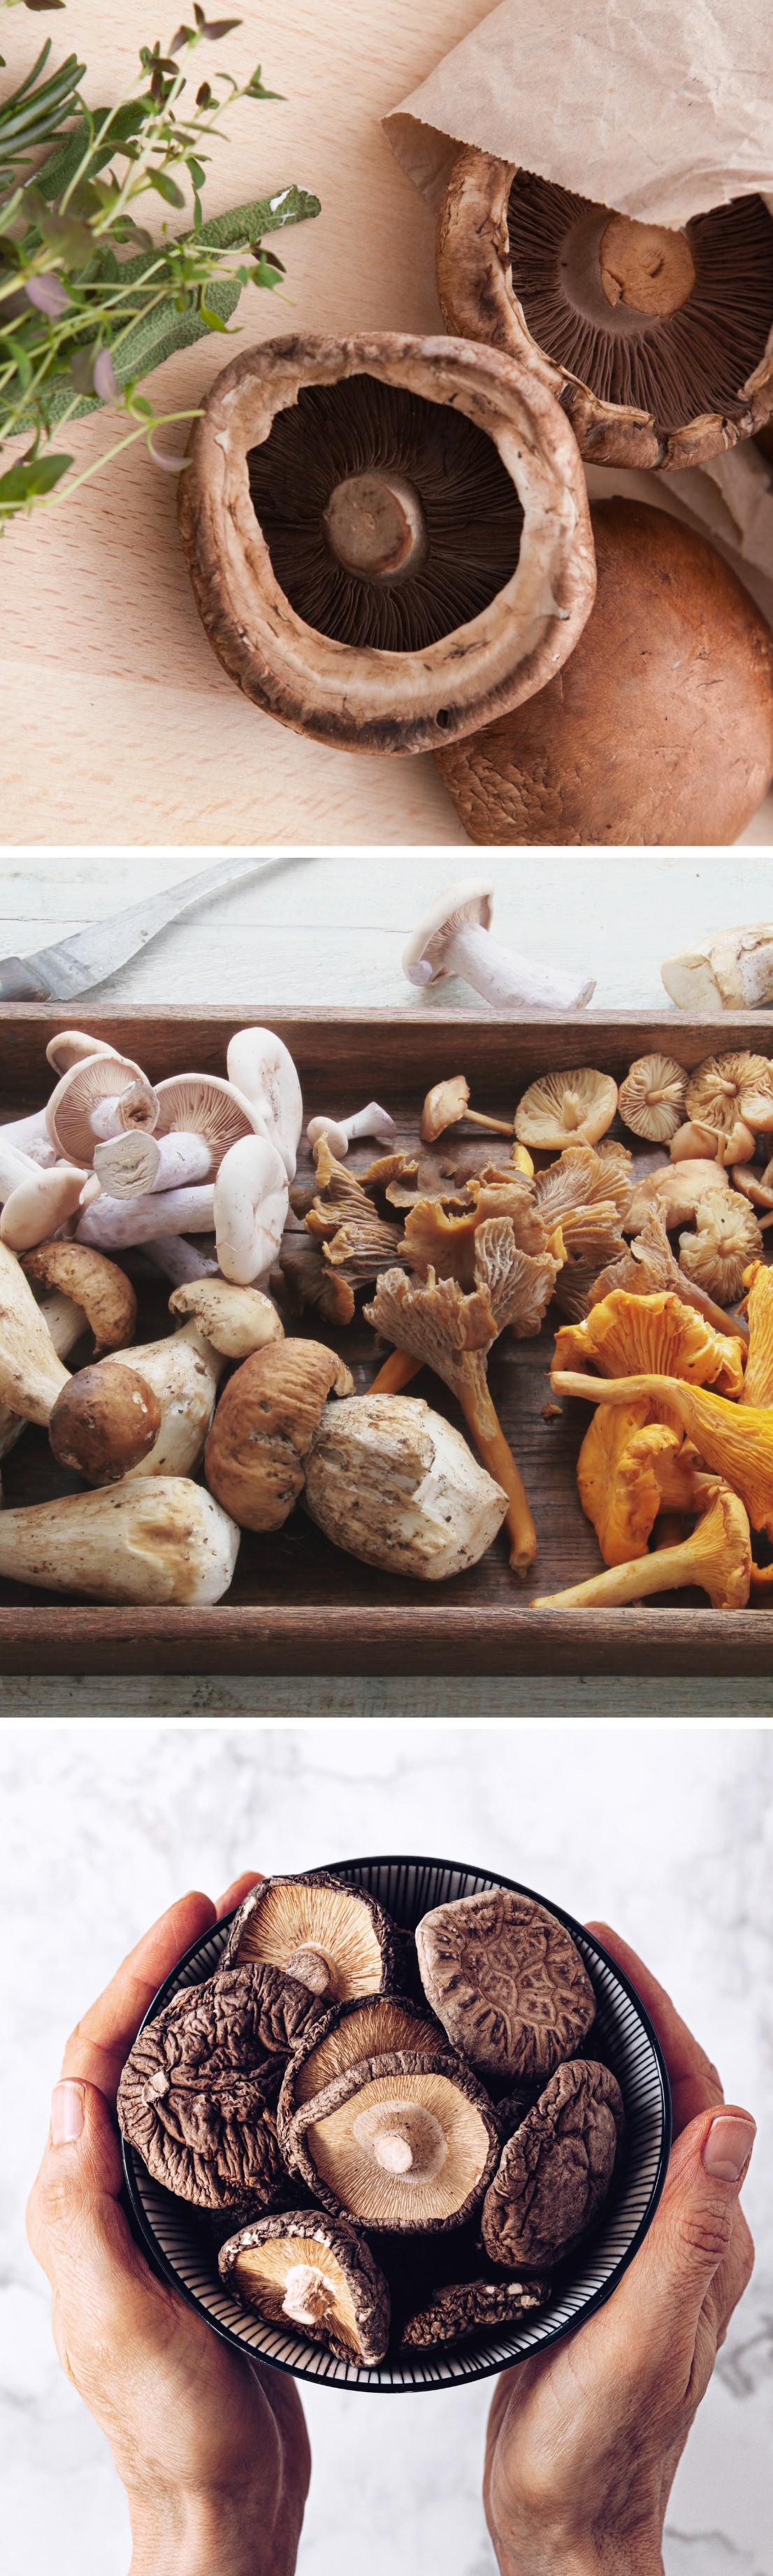 health benefits of mushrooms and mushroom-containing supplements